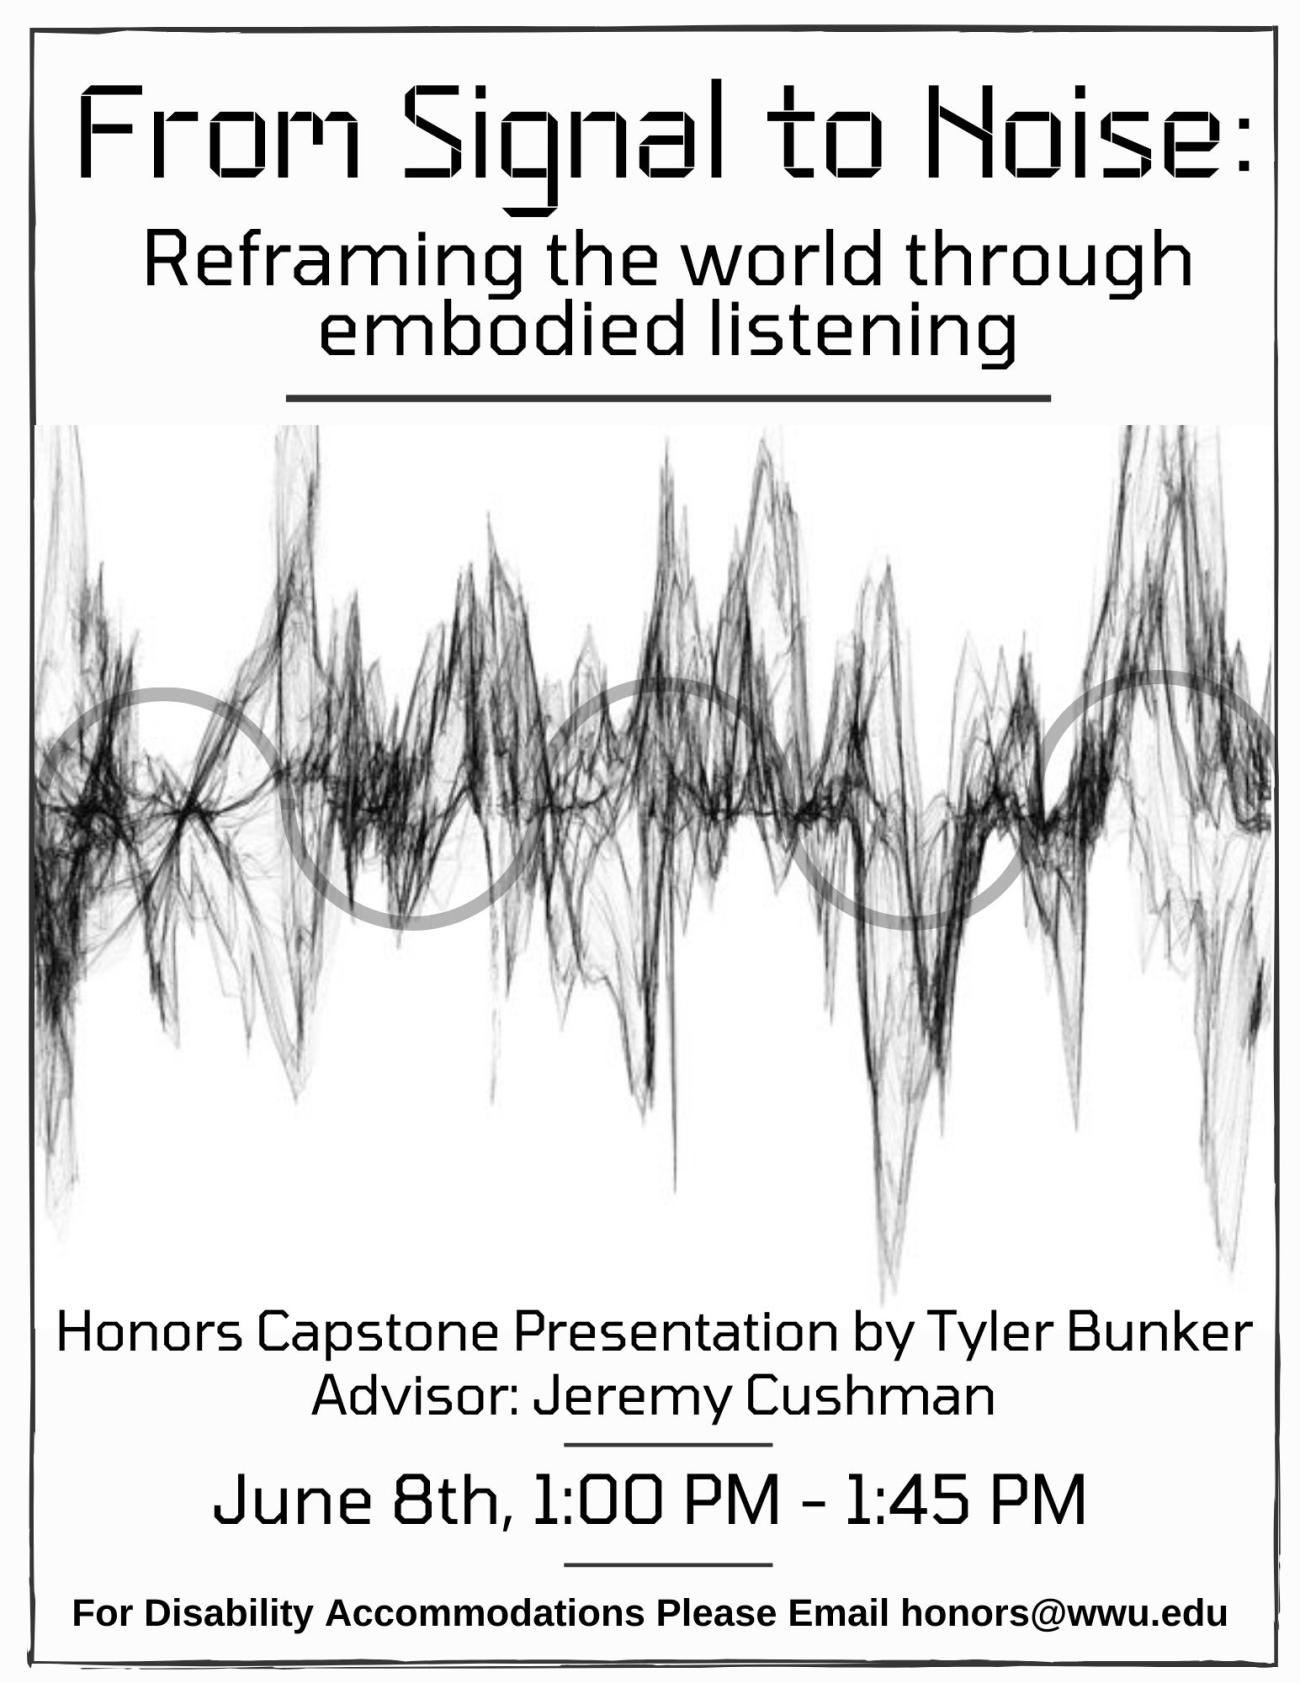 Image: A noisy, chaotic-looking sound wave runs across the middle of the page, with a smooth, sine-like wave overlaid on top of it. Both waves are in black-and-white, and the noisy wave dominates the page. Text: "From Signal to Noise: Reframing the world through embodied listening. Honors Capstone Presentation by Tyler Bunker. Advisor: Jeremy Cushman. June 8th, 1:00 PM - 1:45 PM. For Disability Accommodations Please Email honors@wwu.edu."